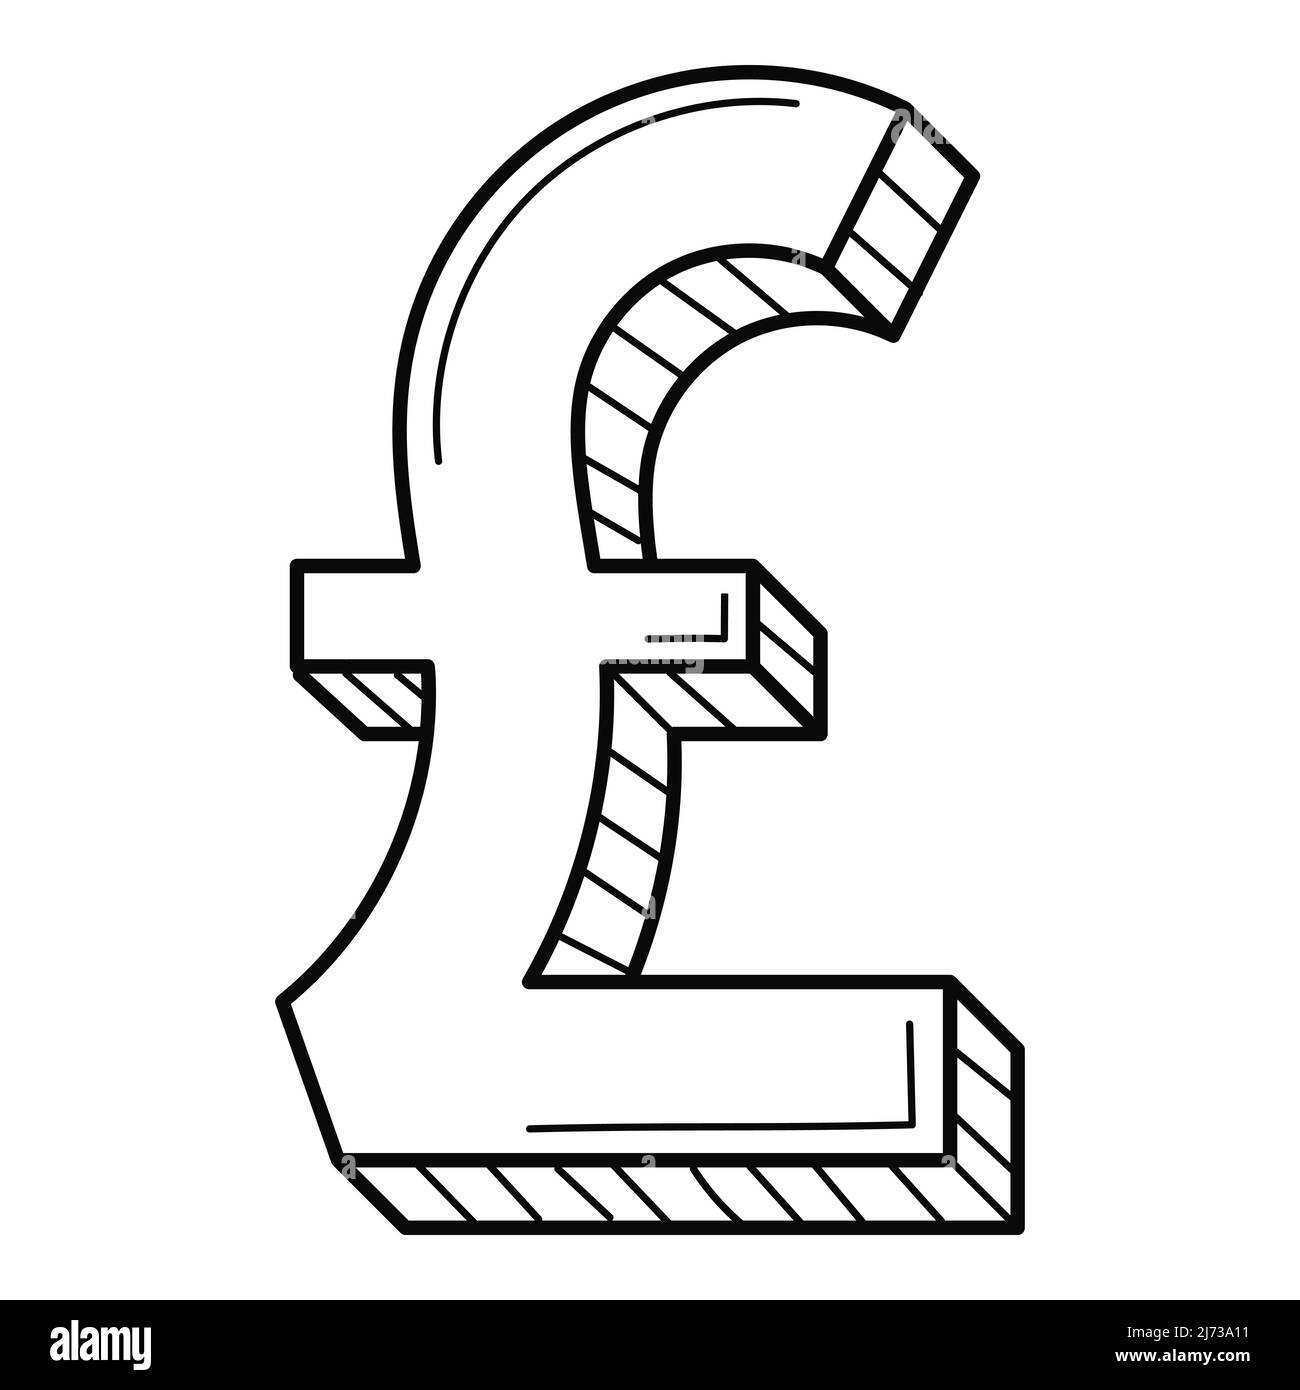 Three-dimensional symbol of the pound sterling. The British currency. Linear icon, sign. Hand-drawn black and white vector illustration. Isolated on a Stock Vector